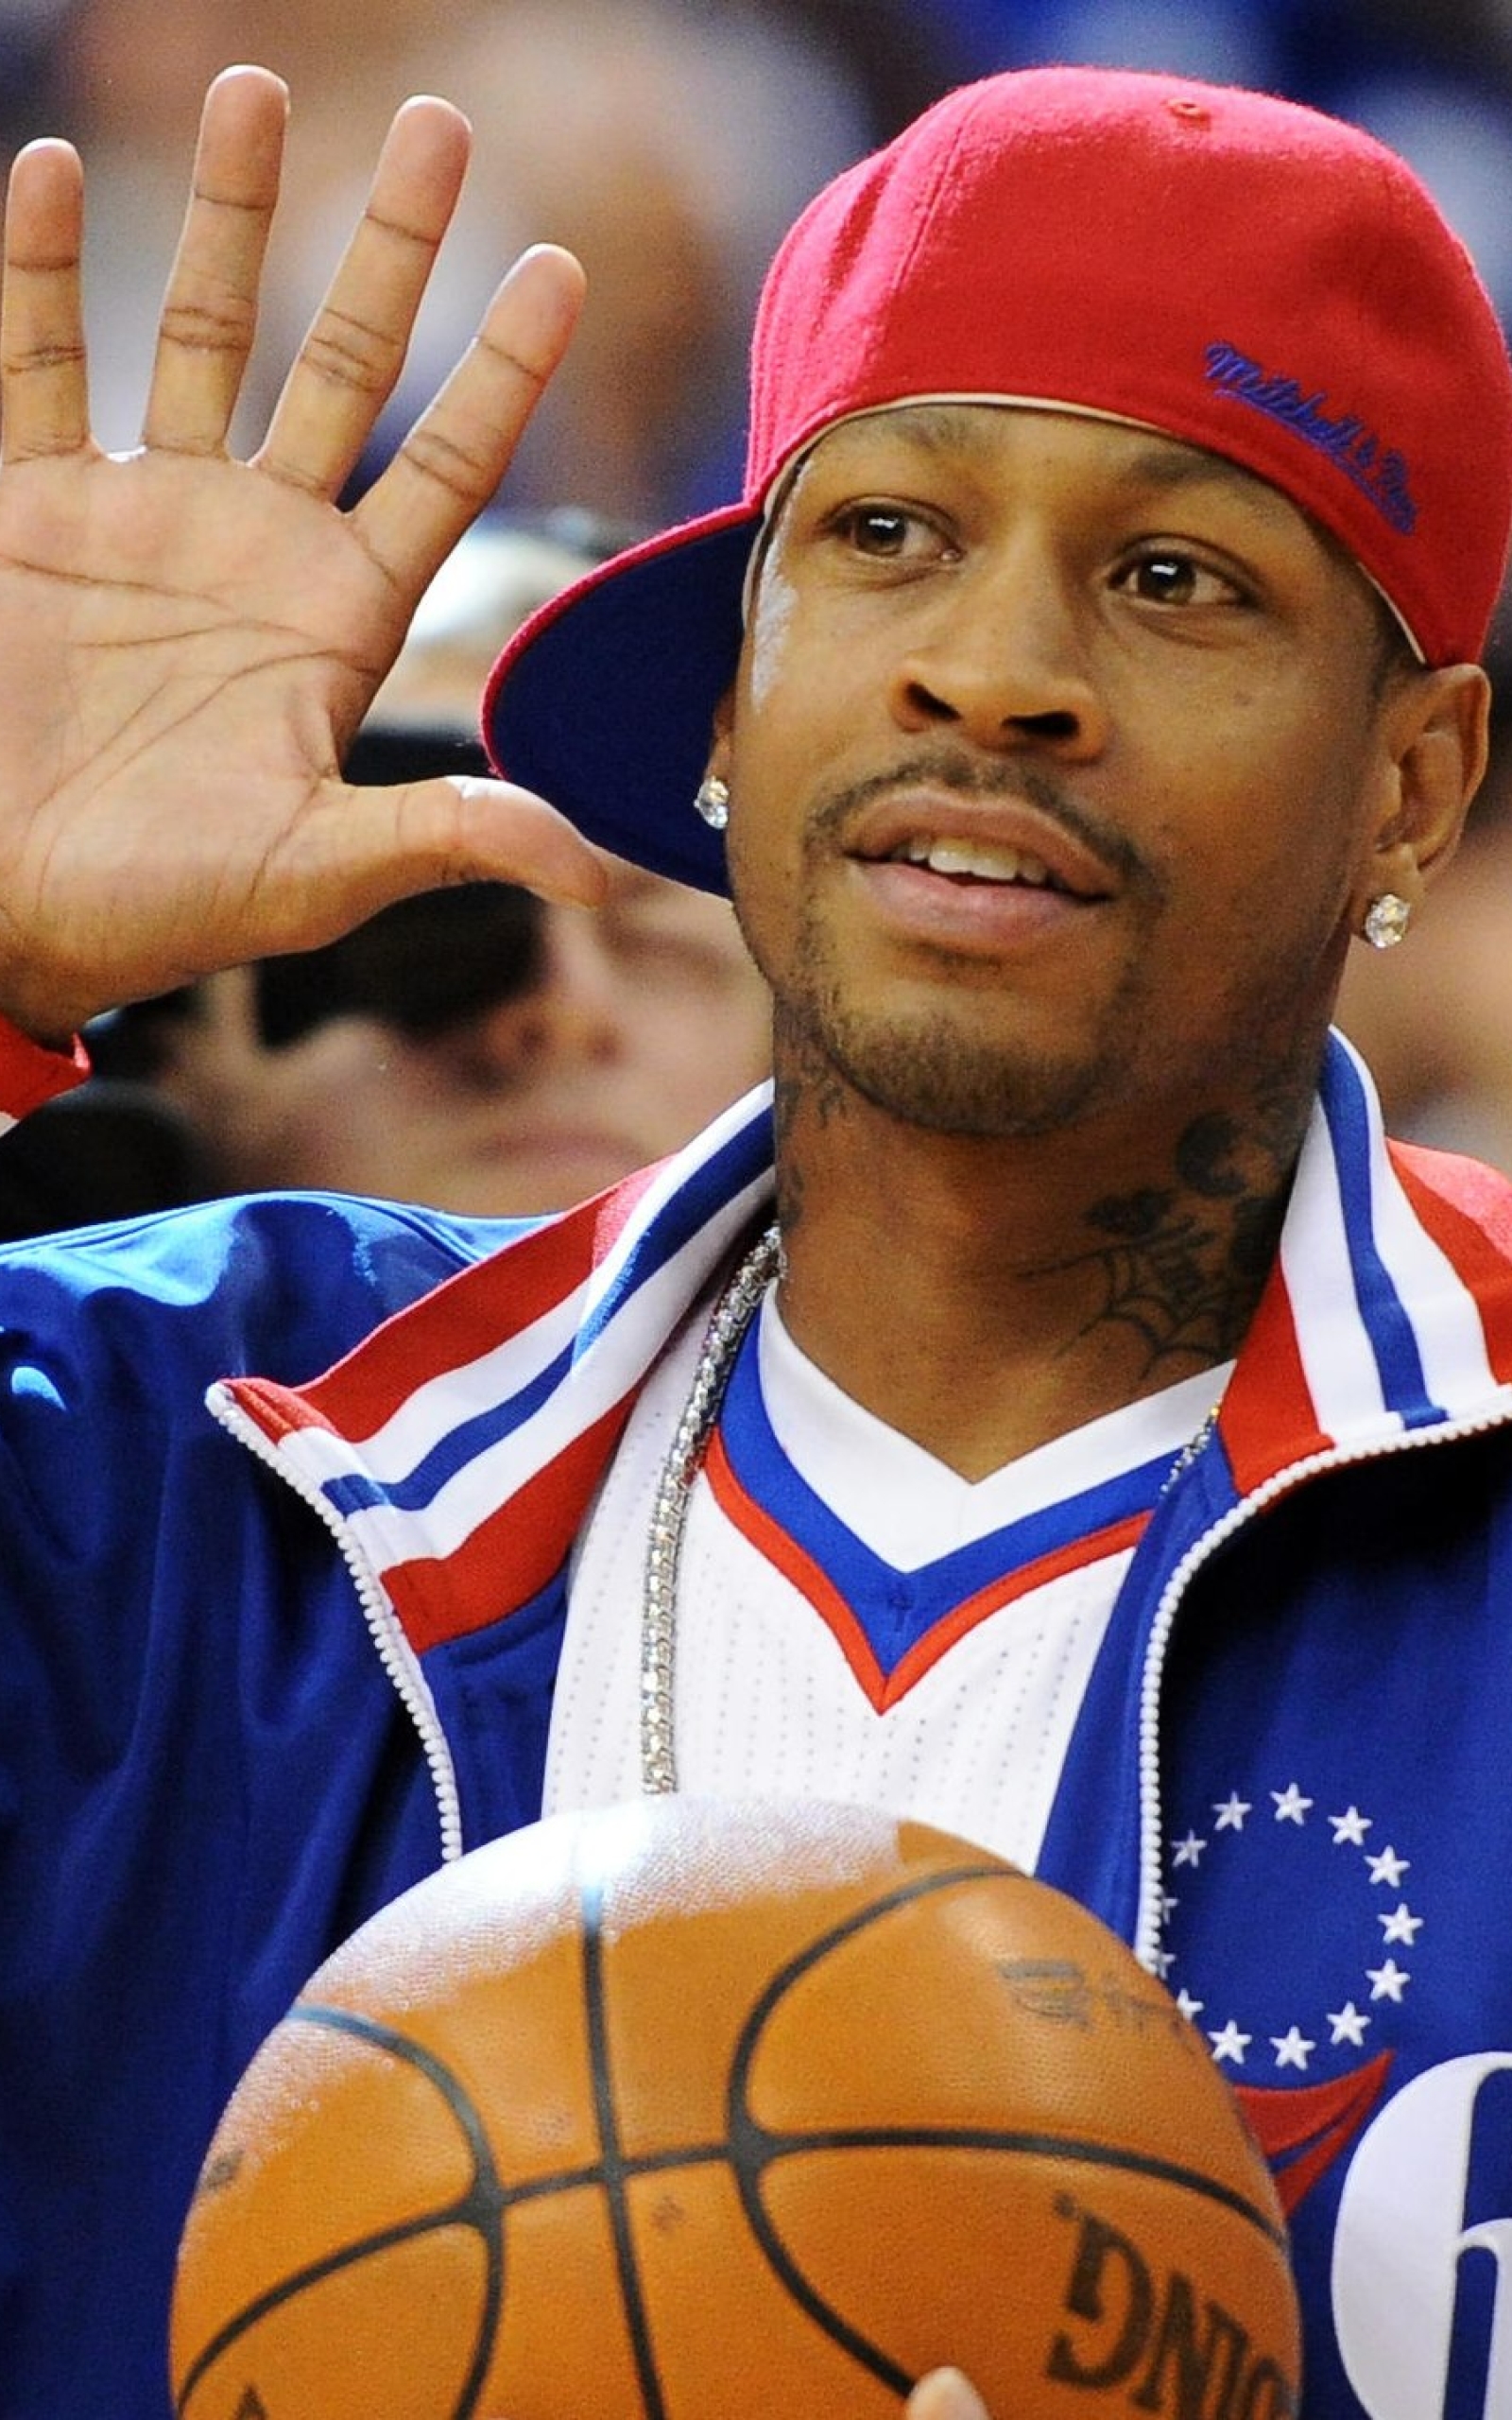 allen iverson HD wallpapers backgrounds